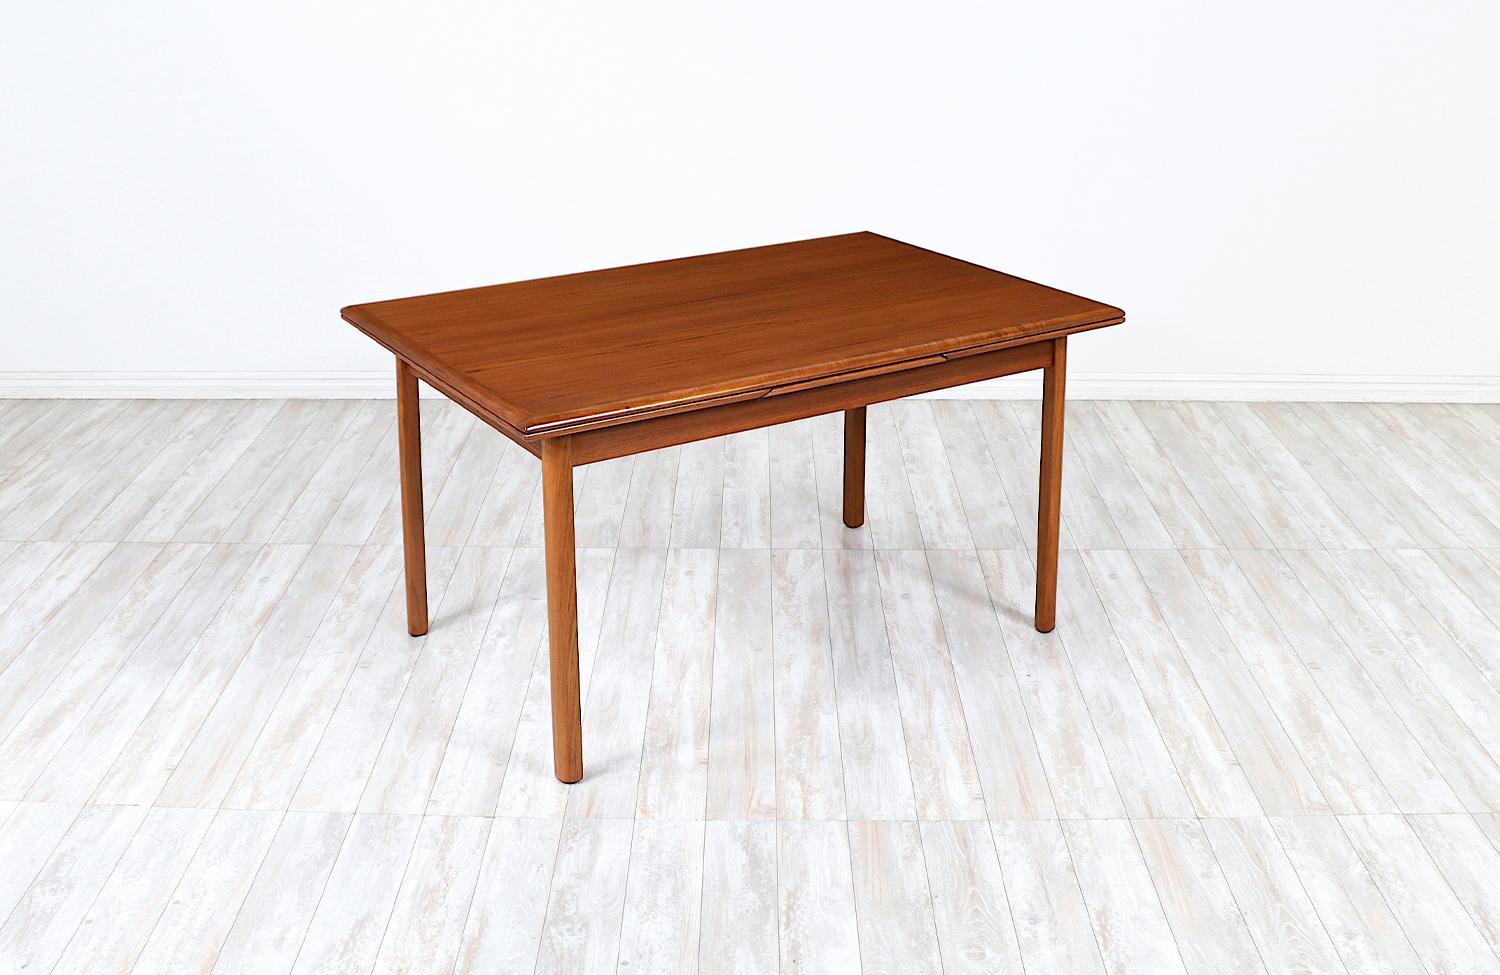 Adorable Danish Modern teak dining table manufactured and designed in Denmark circa 1960s. Made from a solid teak wood base, this exemplary Mid-Century design features two draw leaves that store inconspicuously underneath the table top. This design